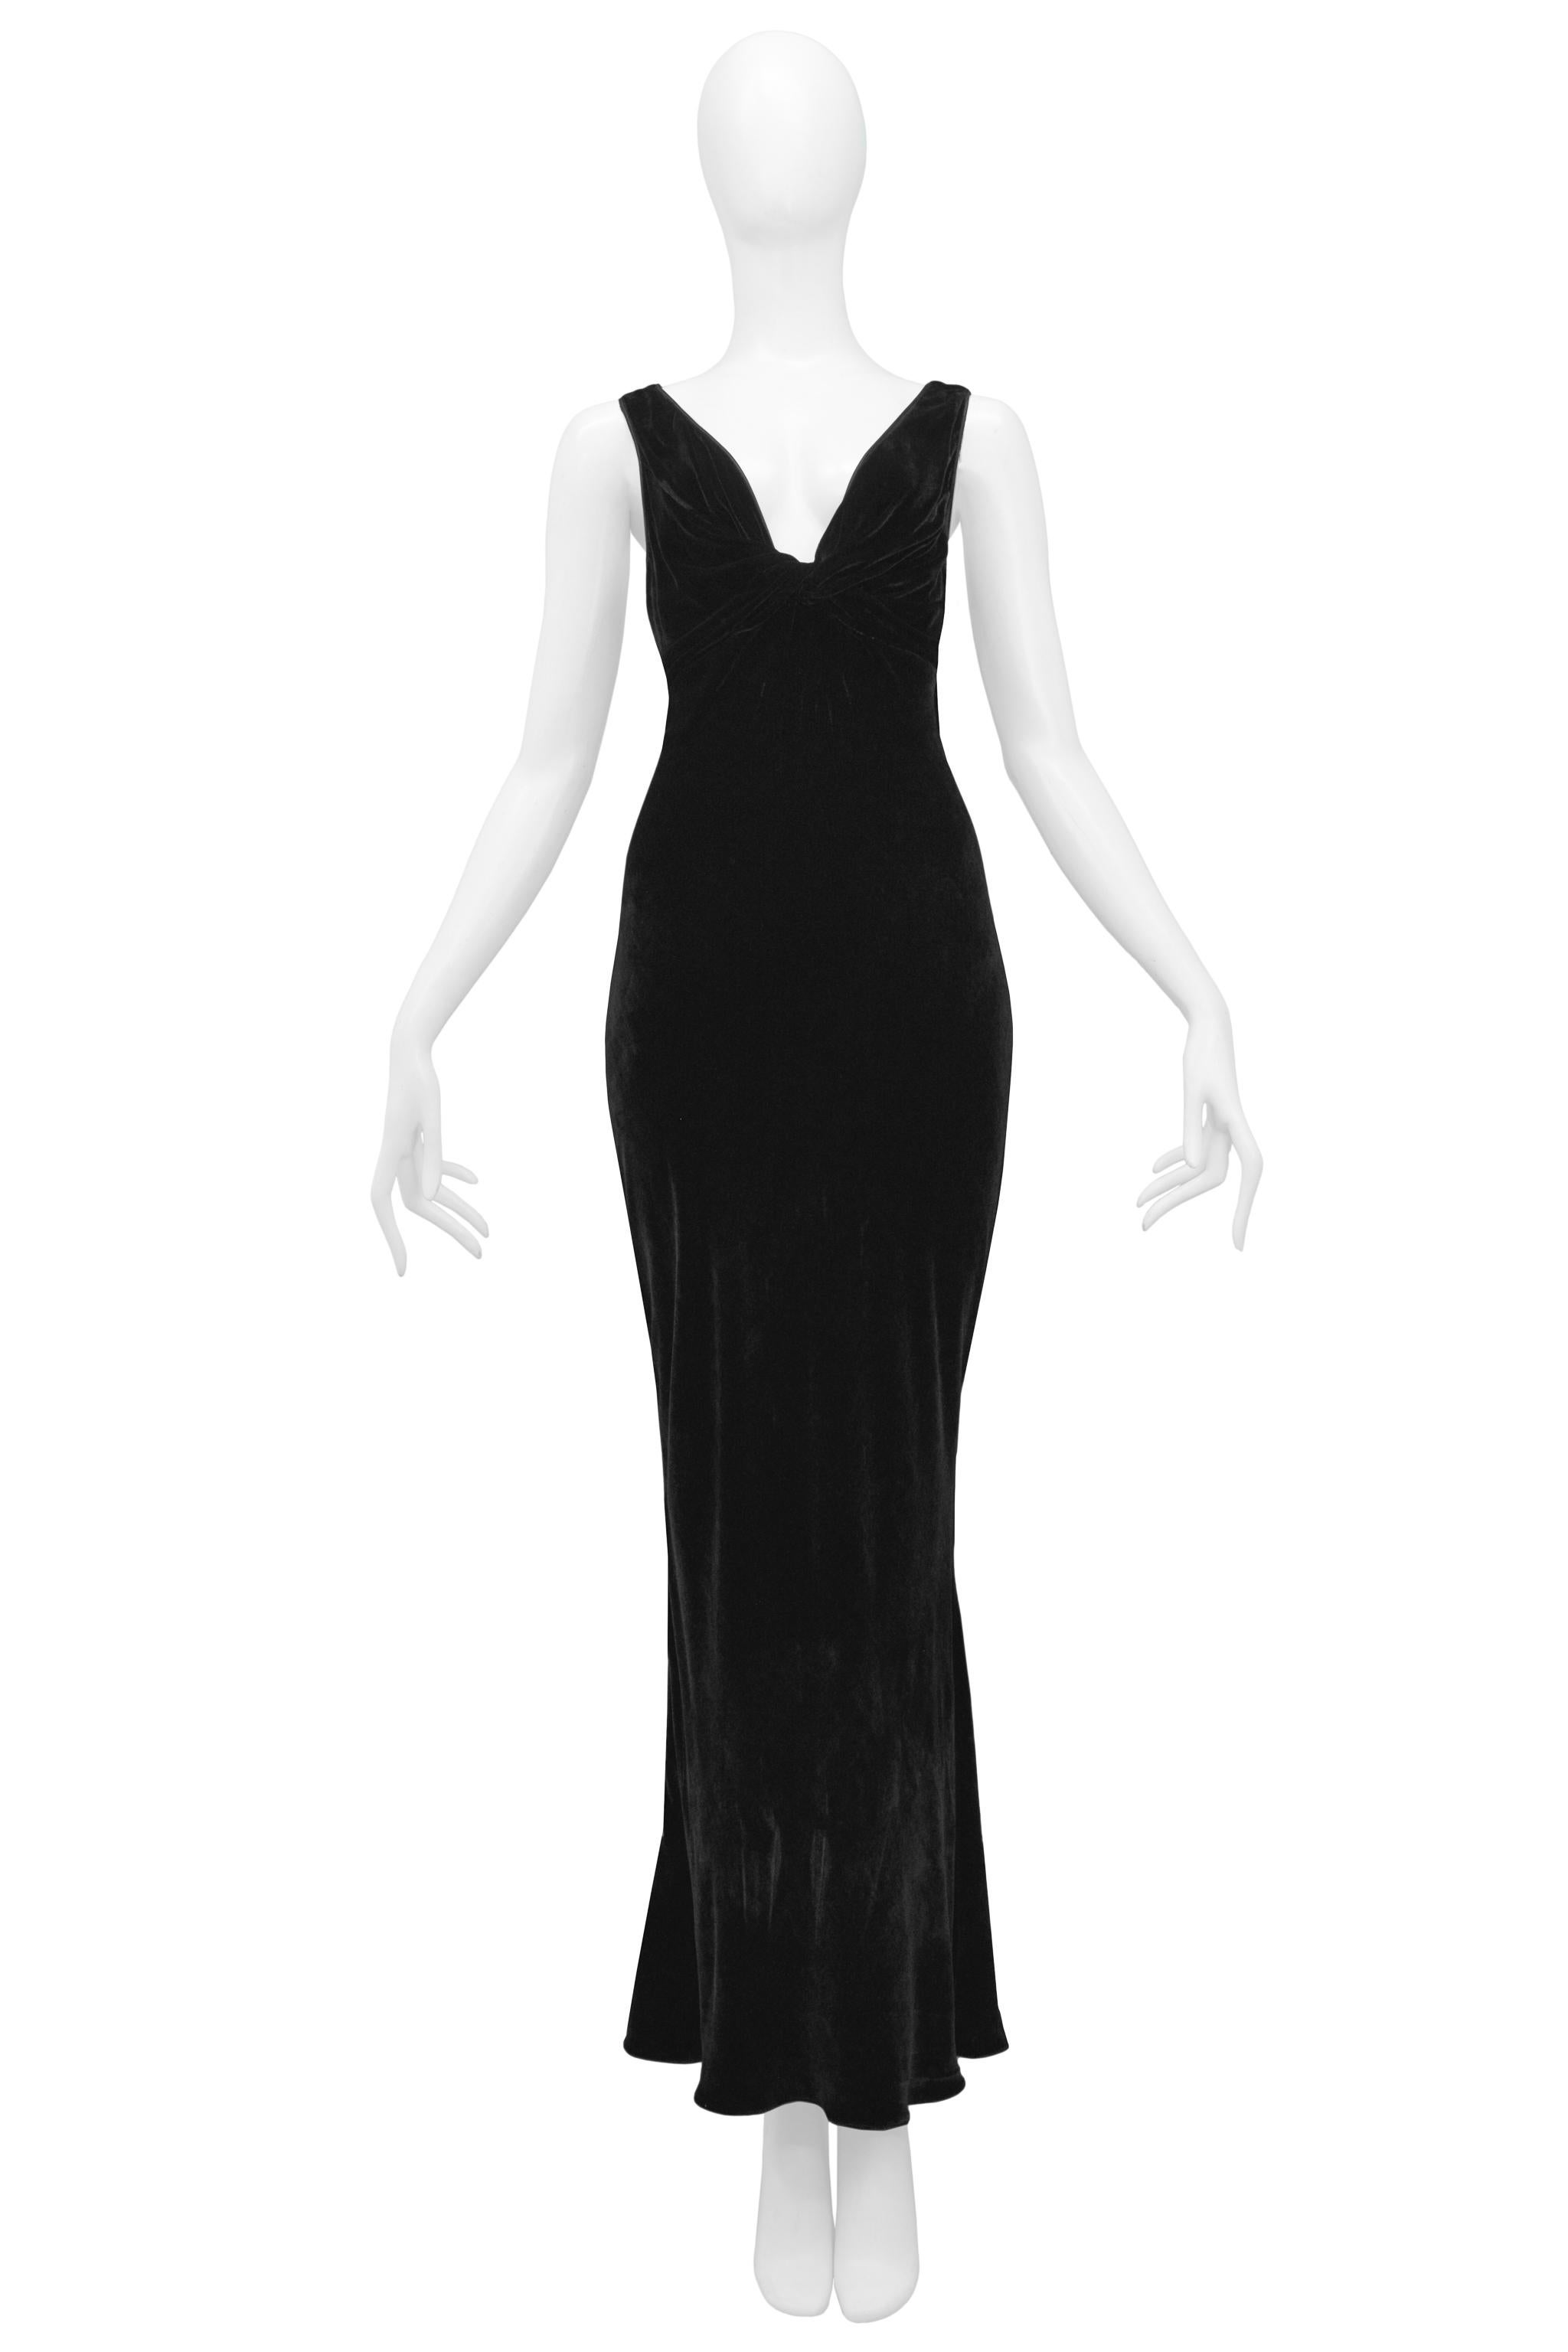 Resurrection is excited to offer a vintage John Galliano black velvet gown featuring a plunging front and back neckline, knot detail at bust, and wide straps. 

John Galliano
Size 6
82% Viscose, 18%Silk
2006 Runway Collection 
Excellent Vintage